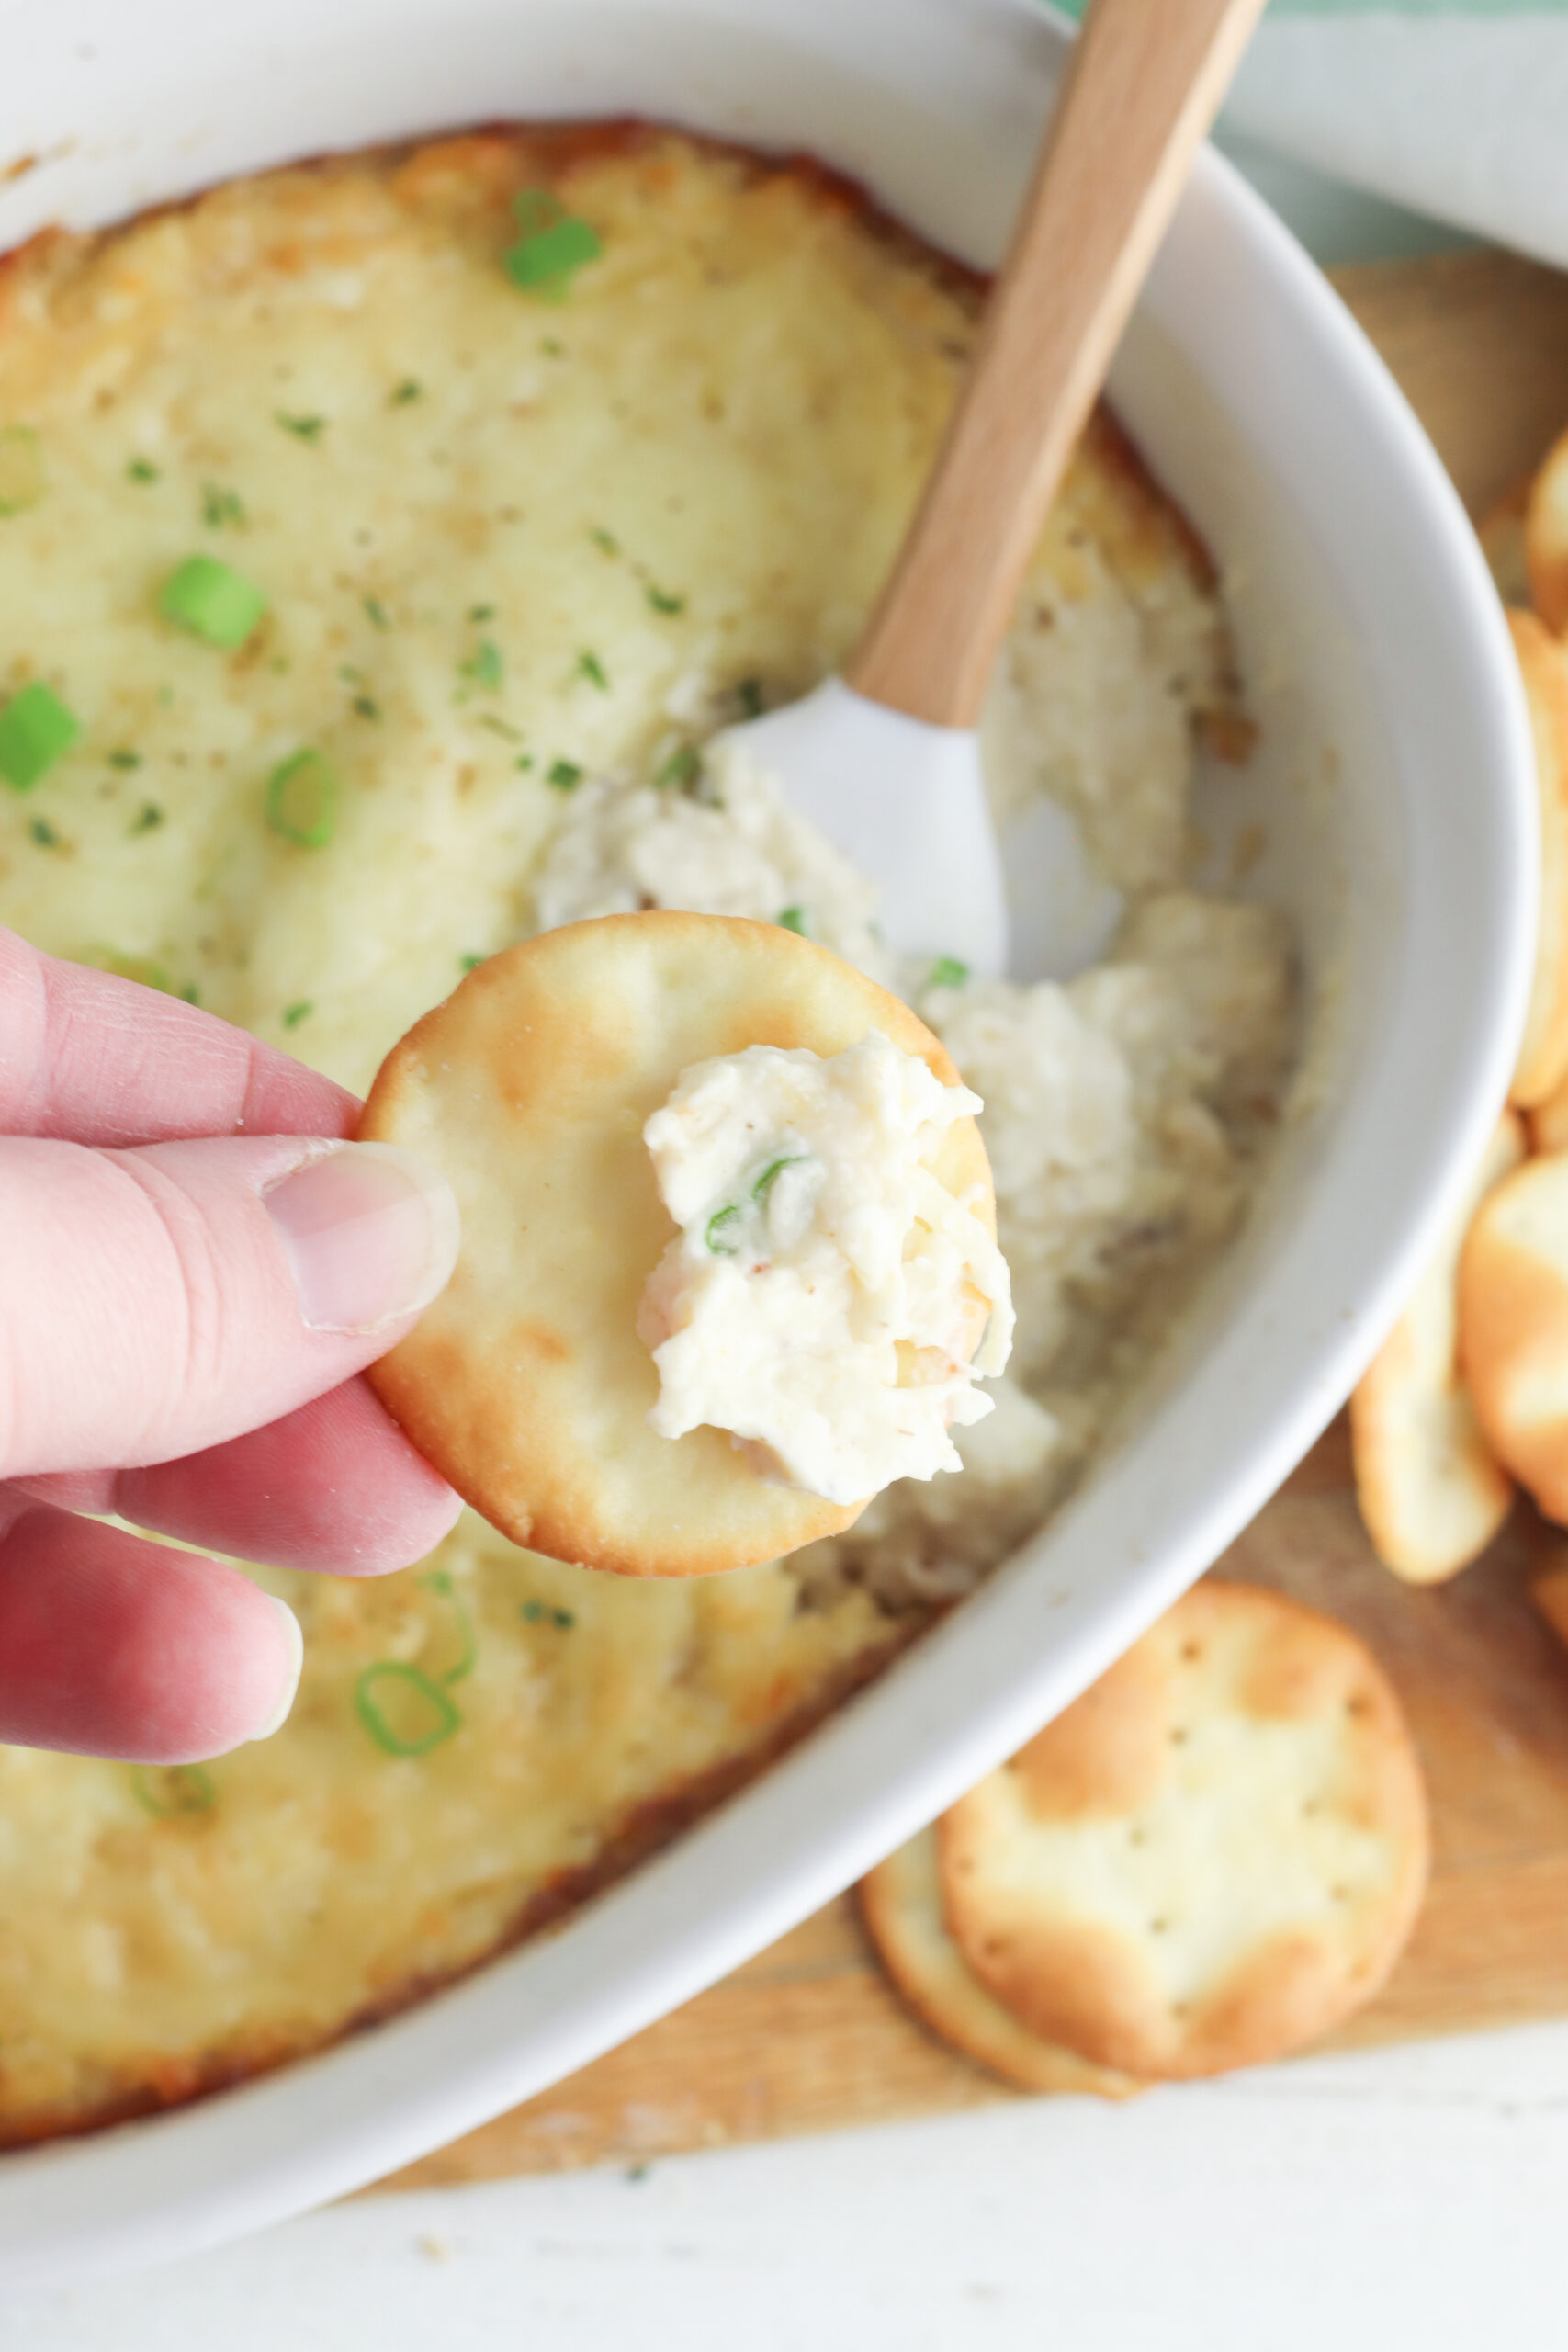 A cracker with the crab dip on it.